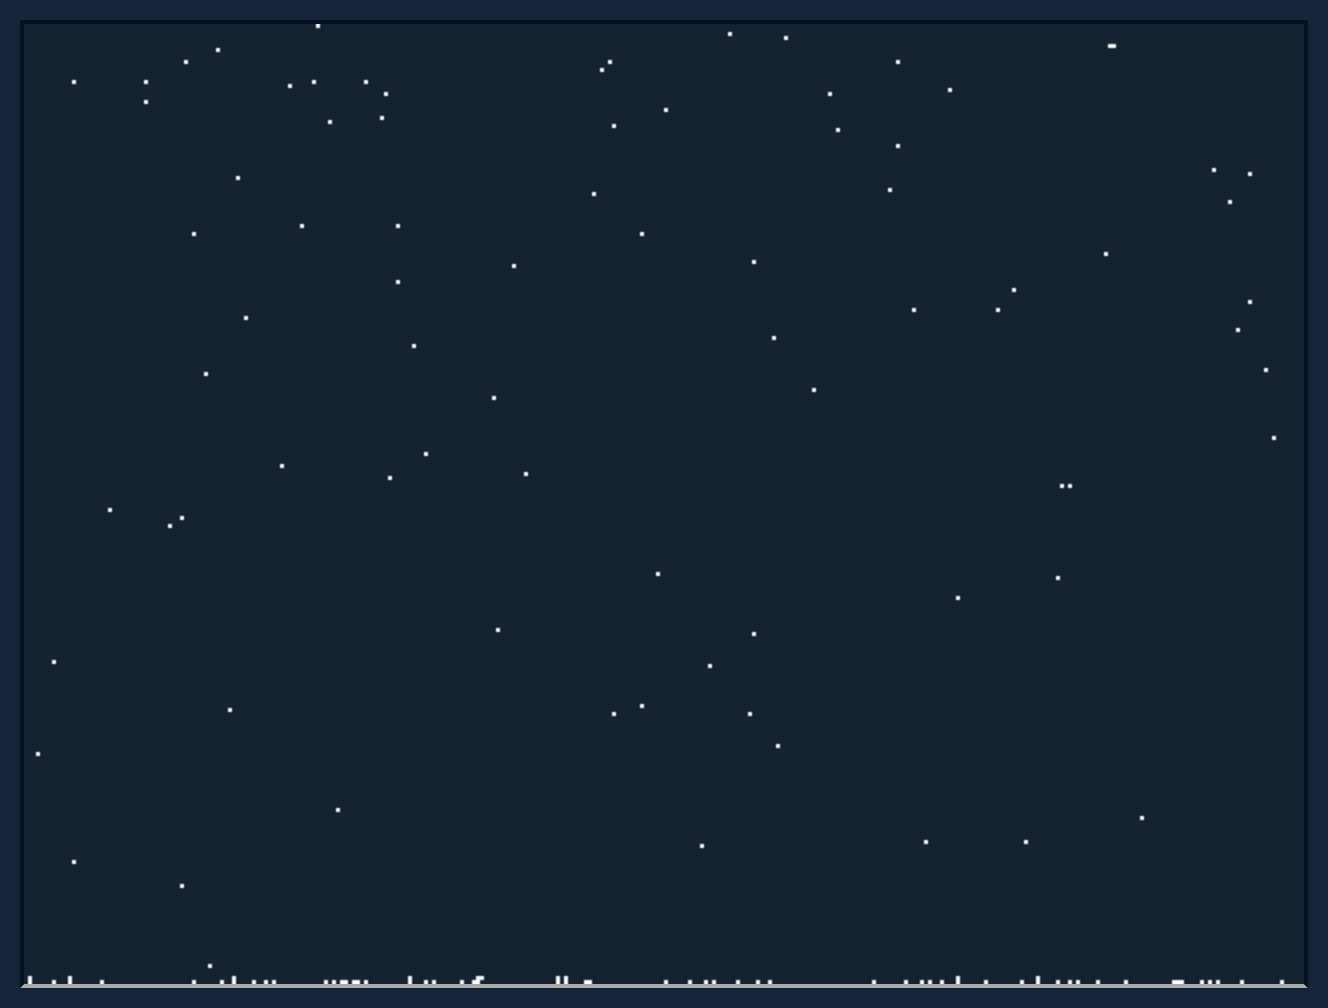 A screenshot of the Flake demo, showing pixel snowflakes falling and accumulating on the bottom.